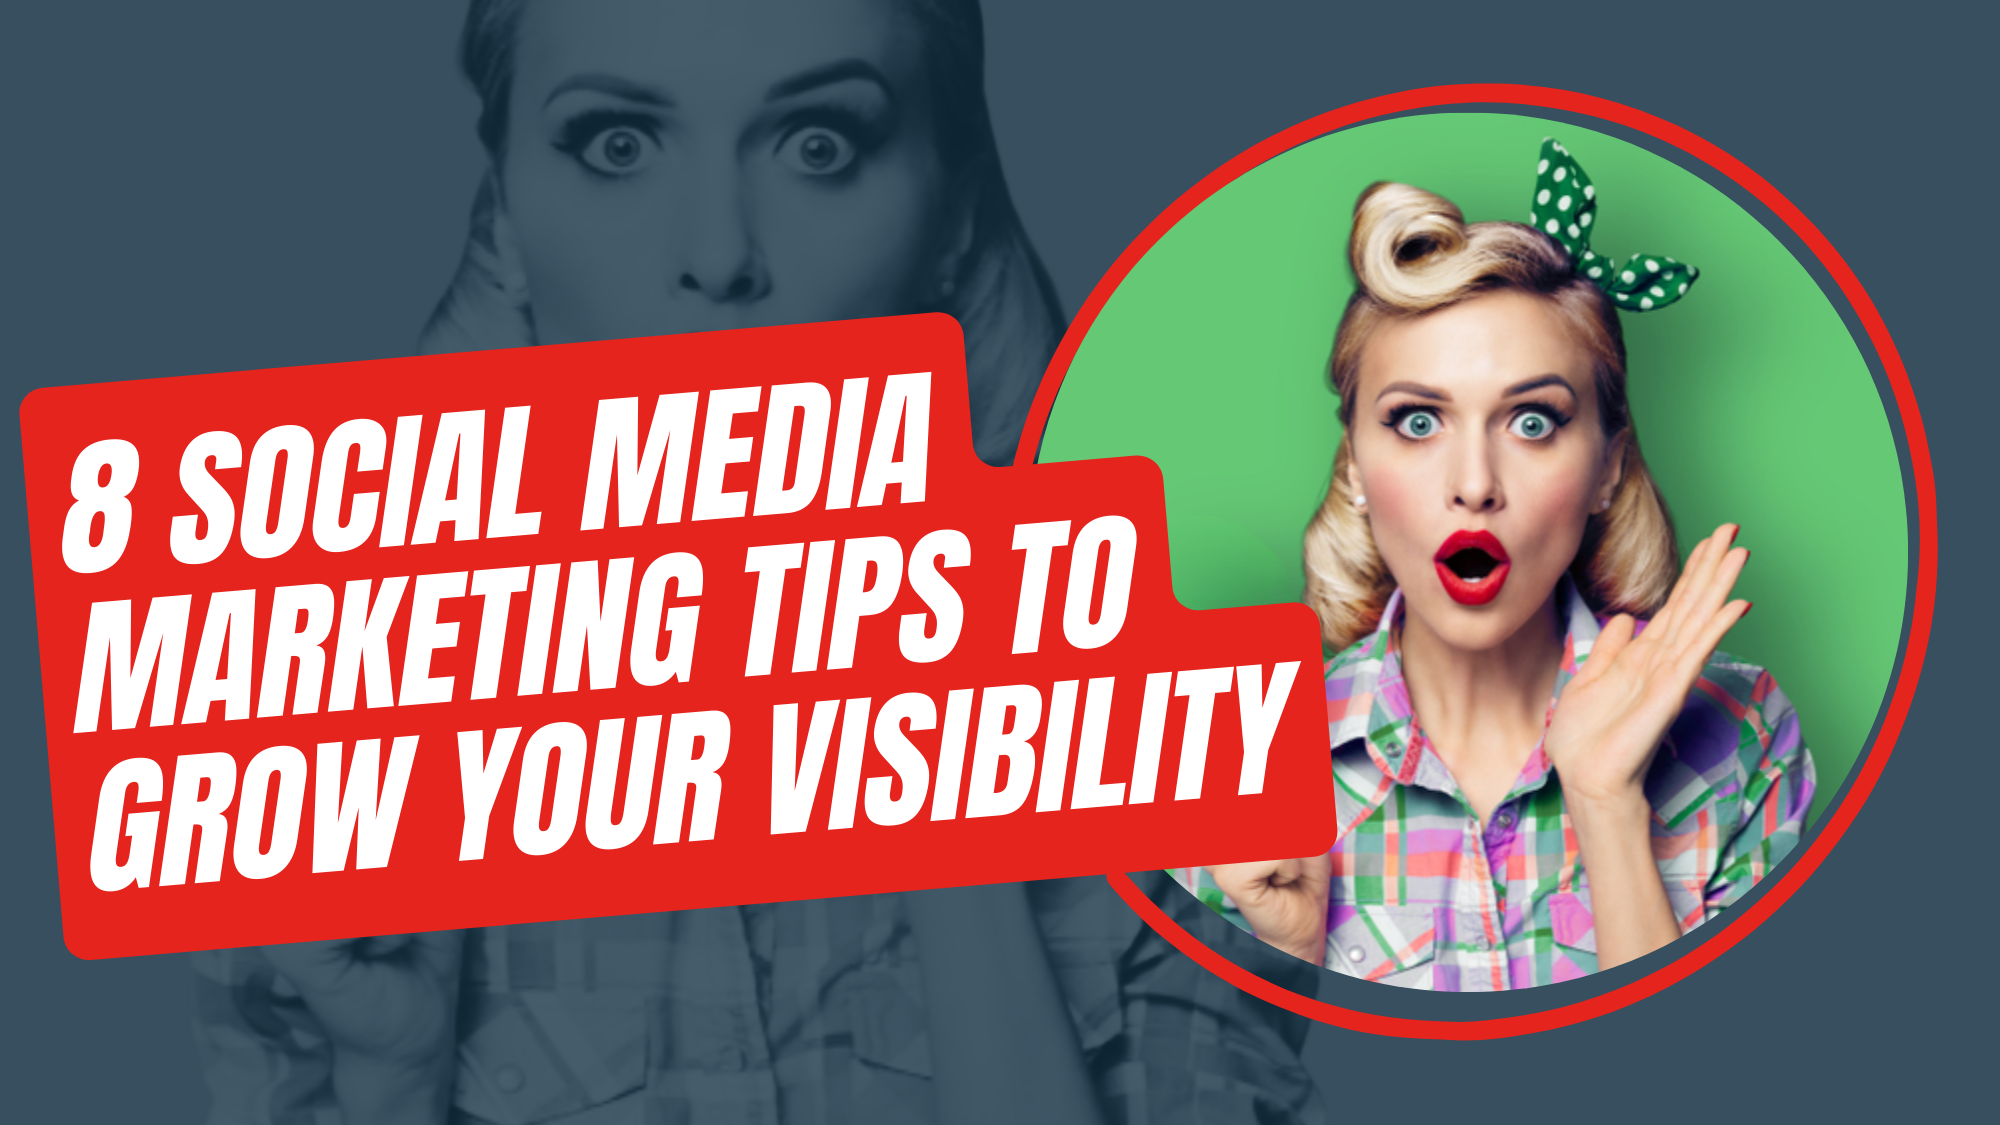 8 Social Media Marketing Tips to Grow Your Visibility